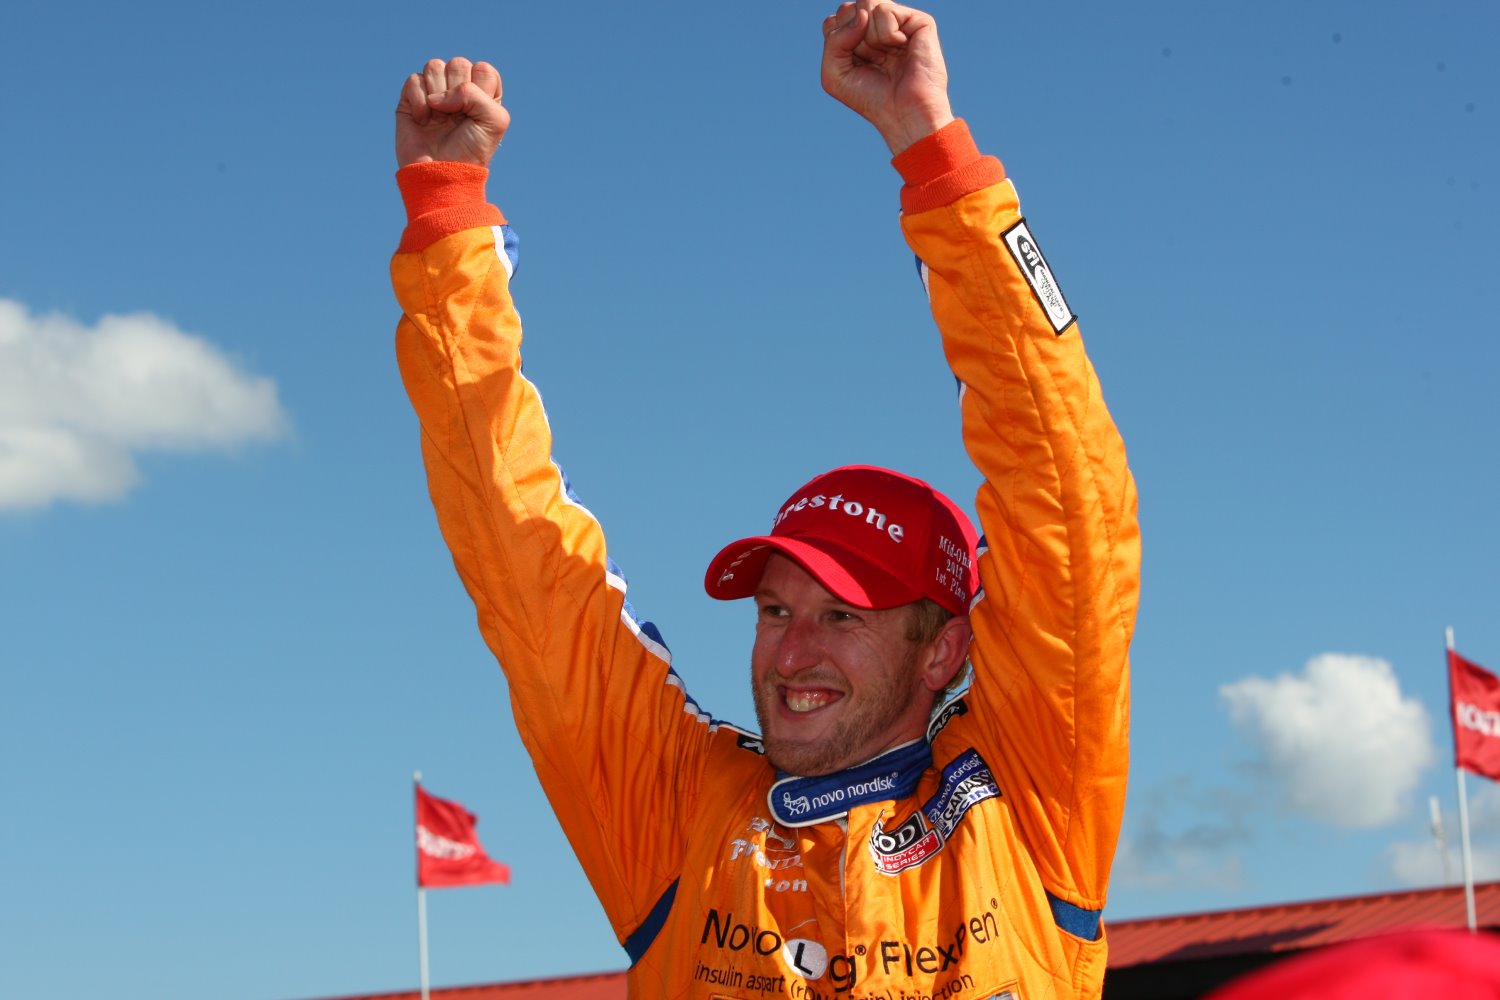 Charlie Kimball won at Mid-Ohio in 2013. His odds to win today are 100/1 